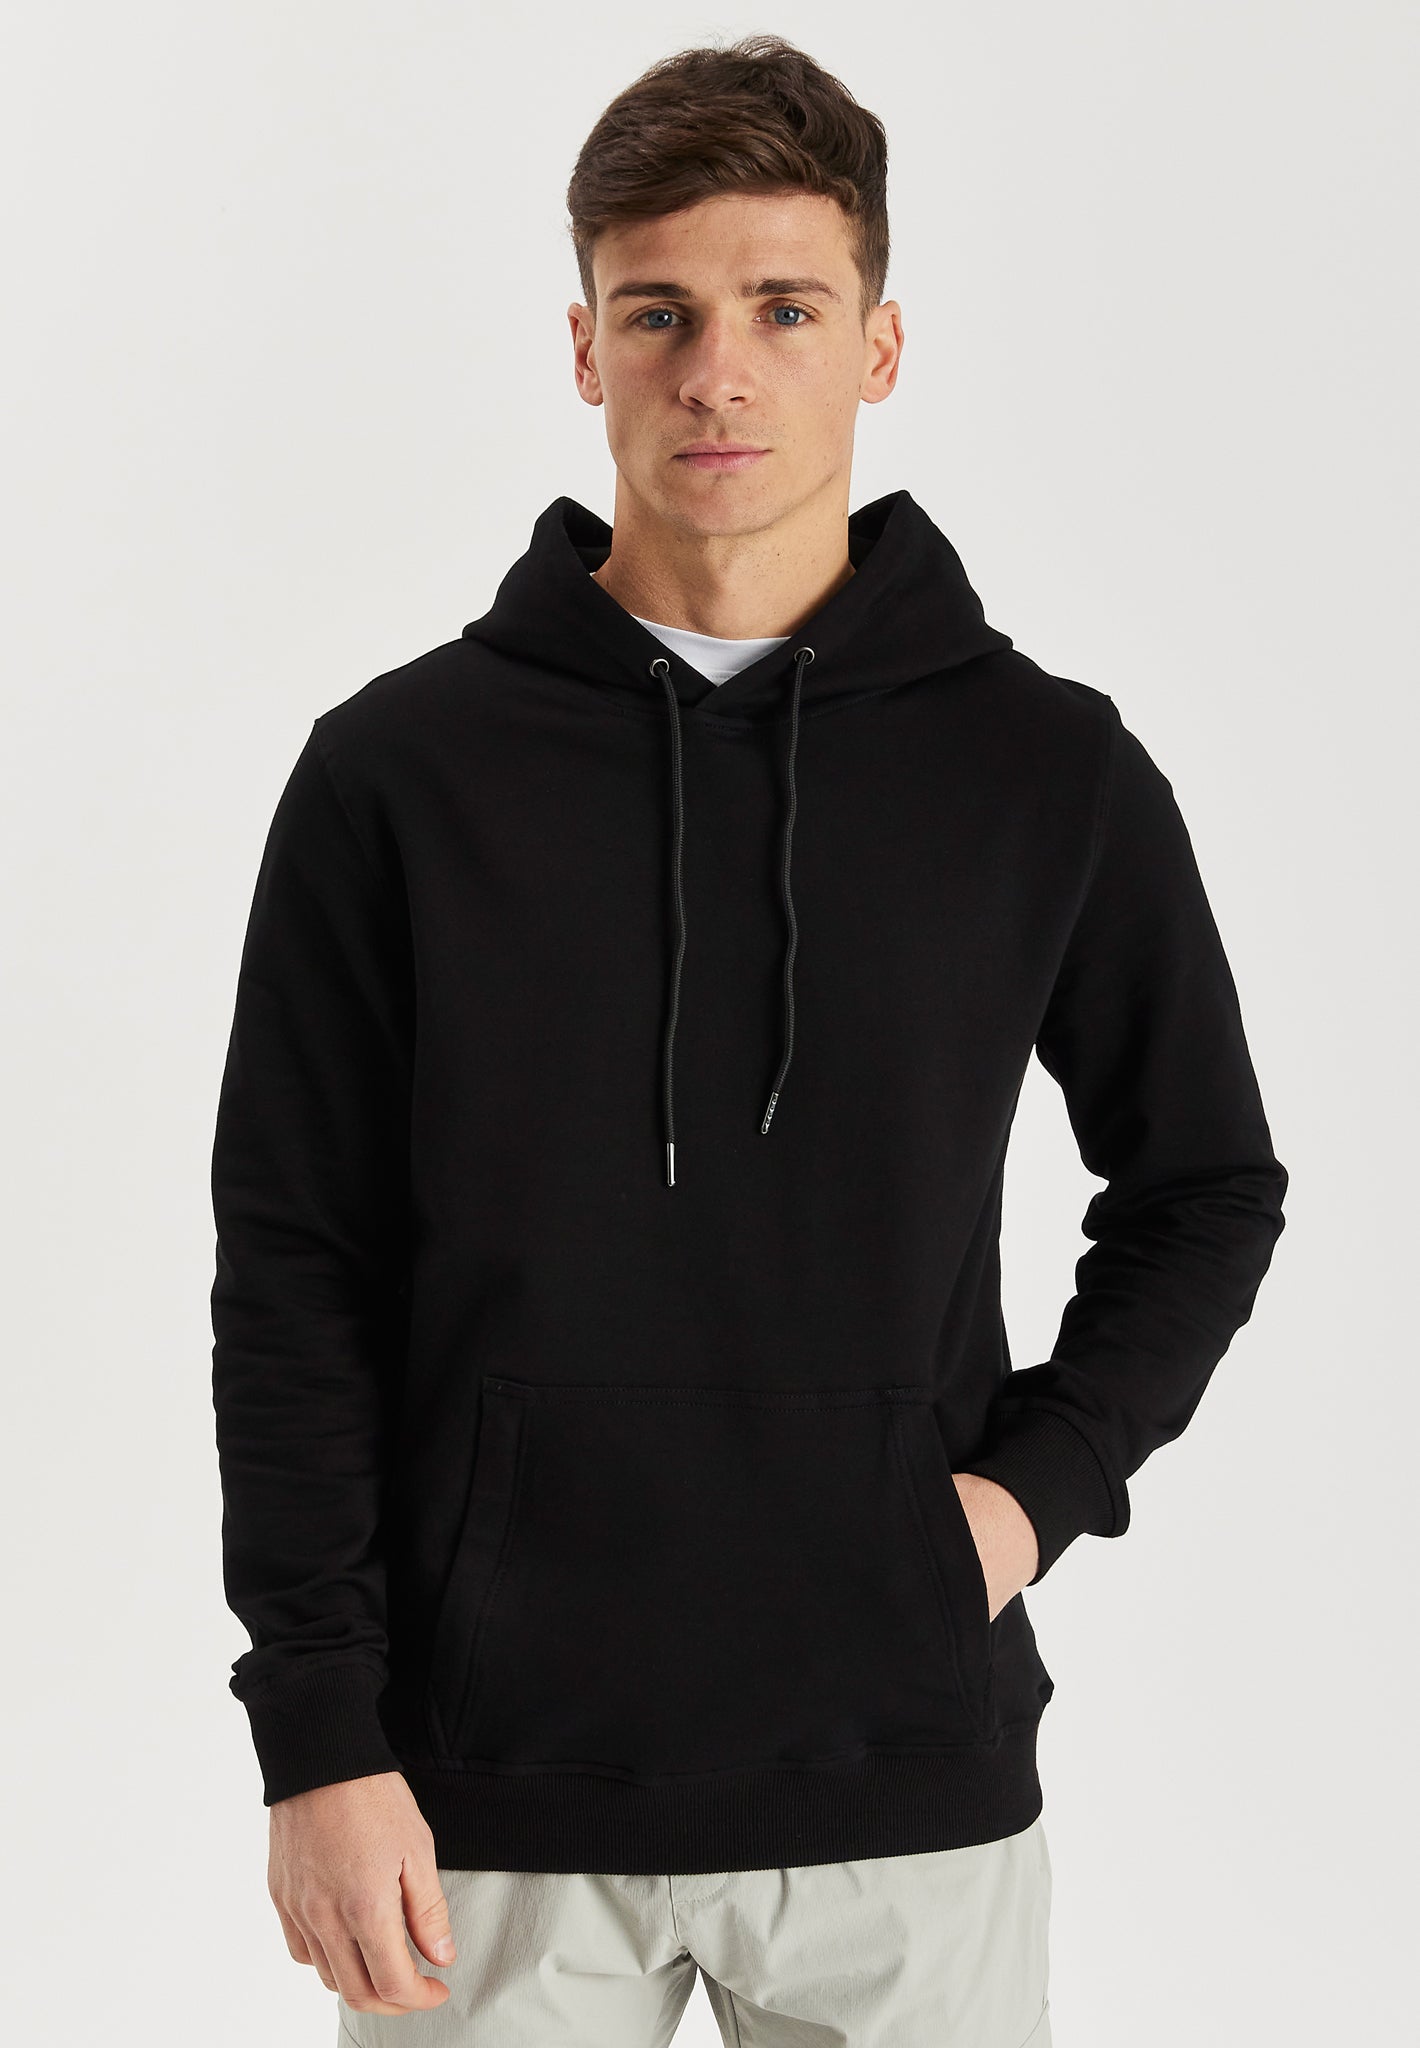 LUXURY HOODIES | Luciano Fashion Limited